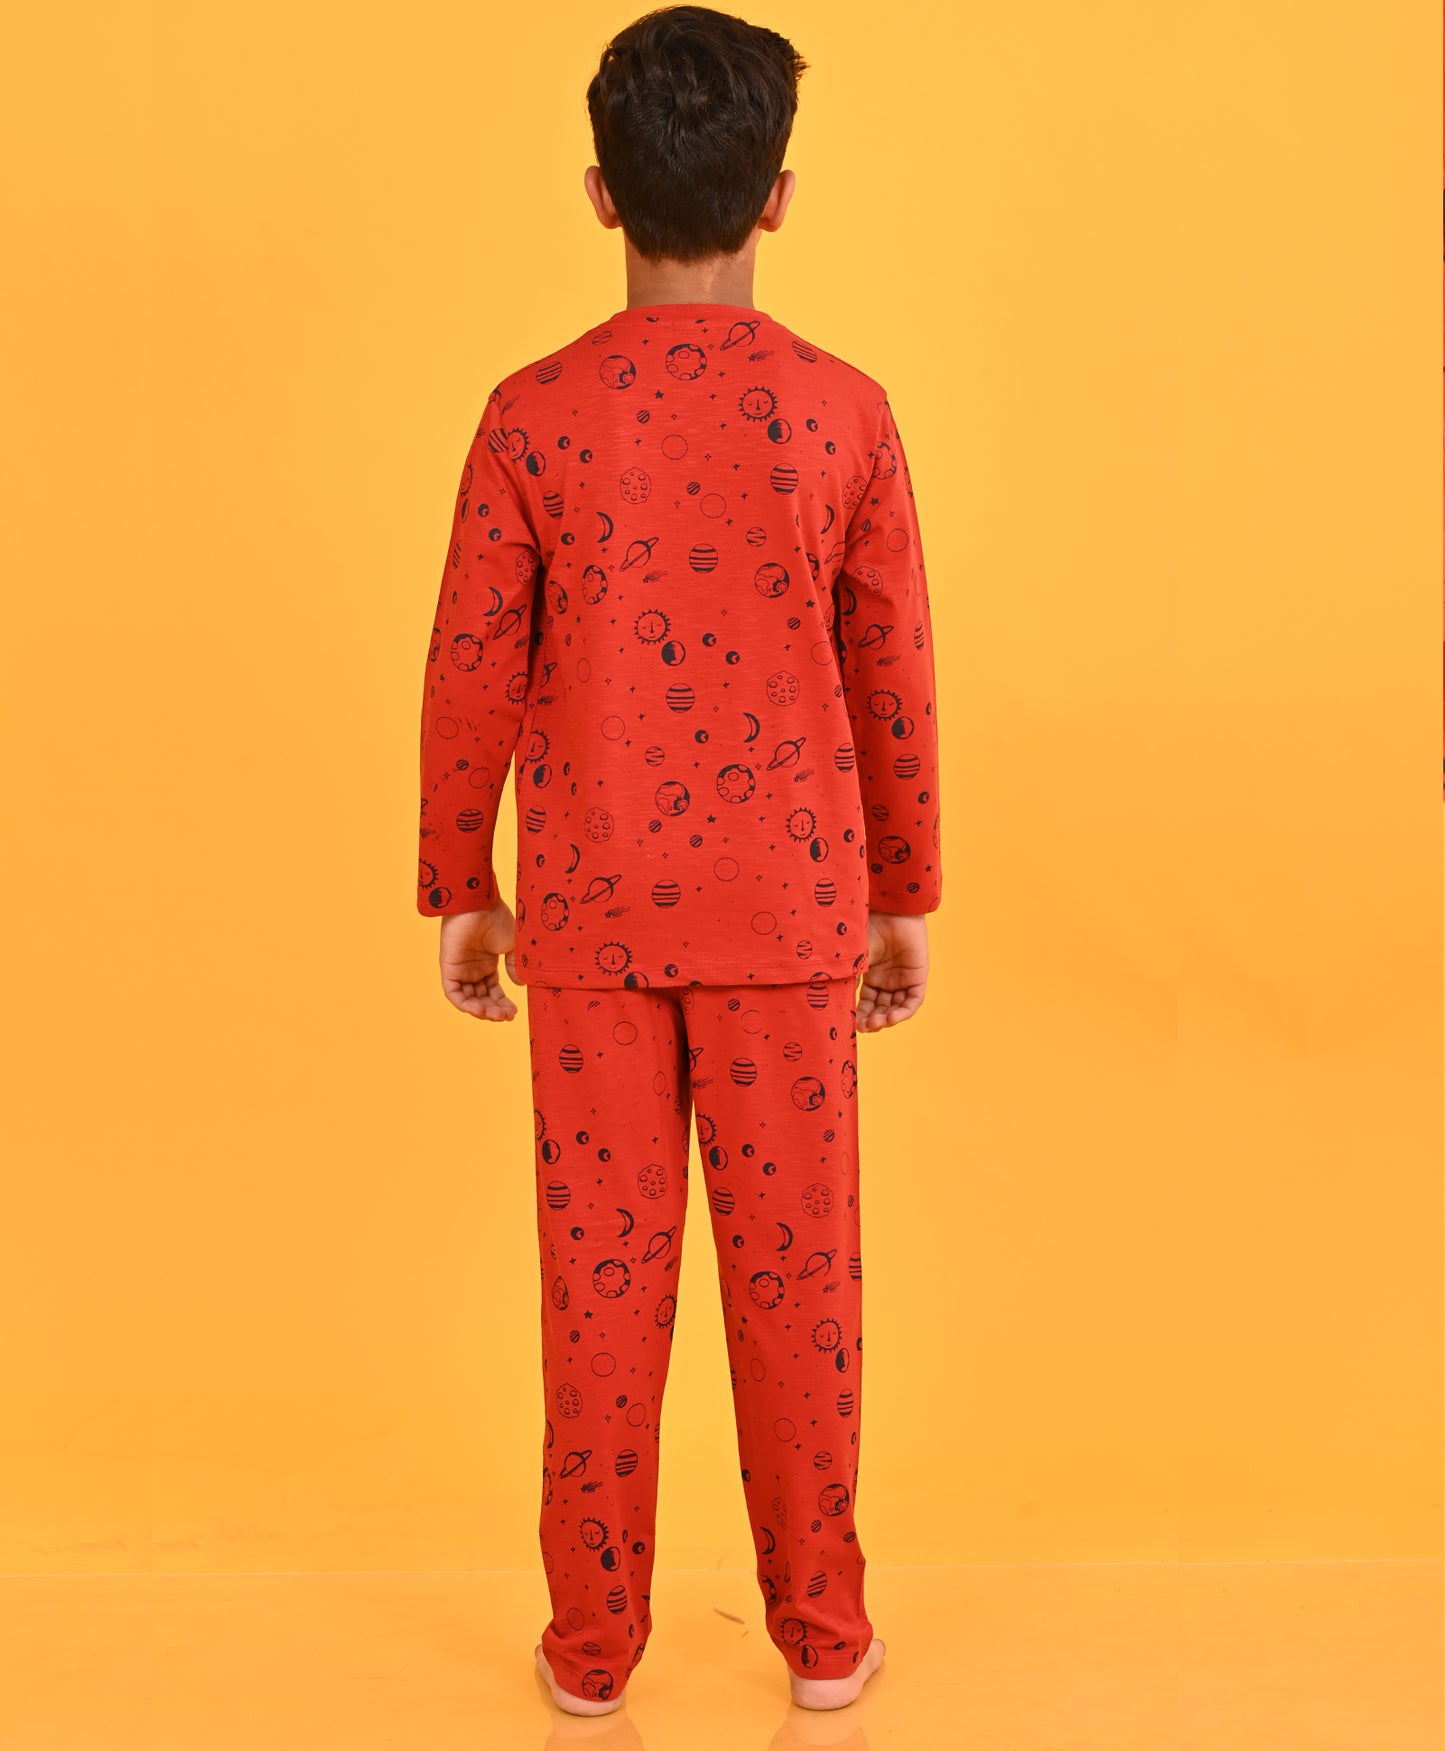 RED SOLAR SYSTEM LONG SLEEVES PYJAMA SET D - RED